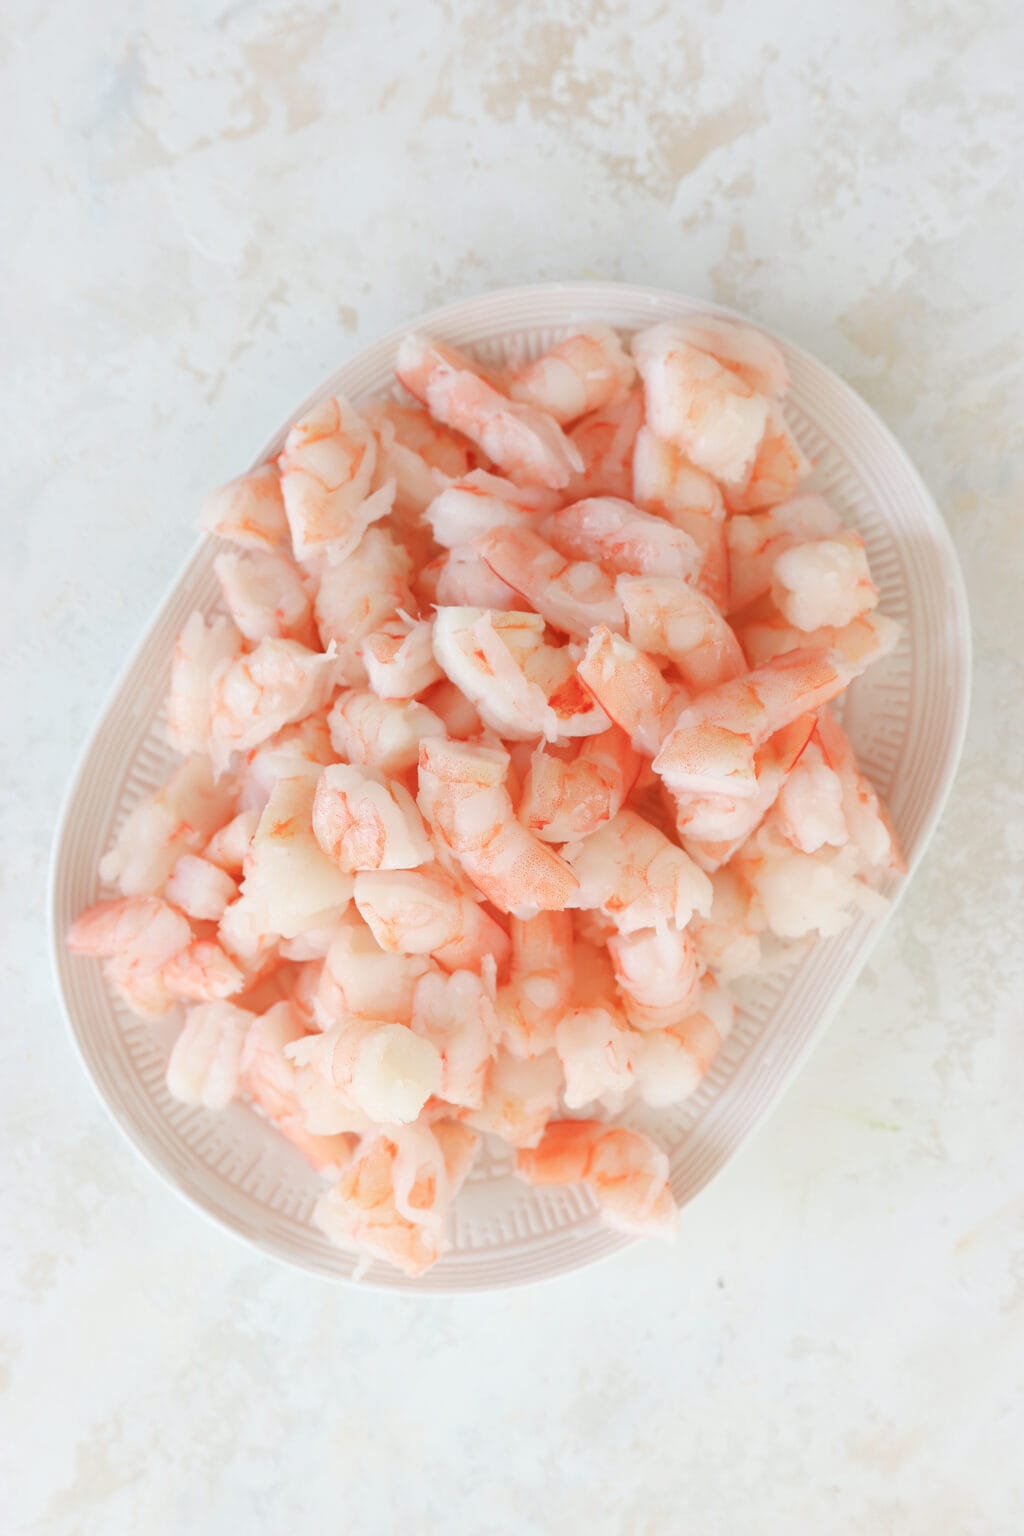 A white plate is on a marble background. There is pink shrimp piled on the plate. The shrimp is chopped into thirds